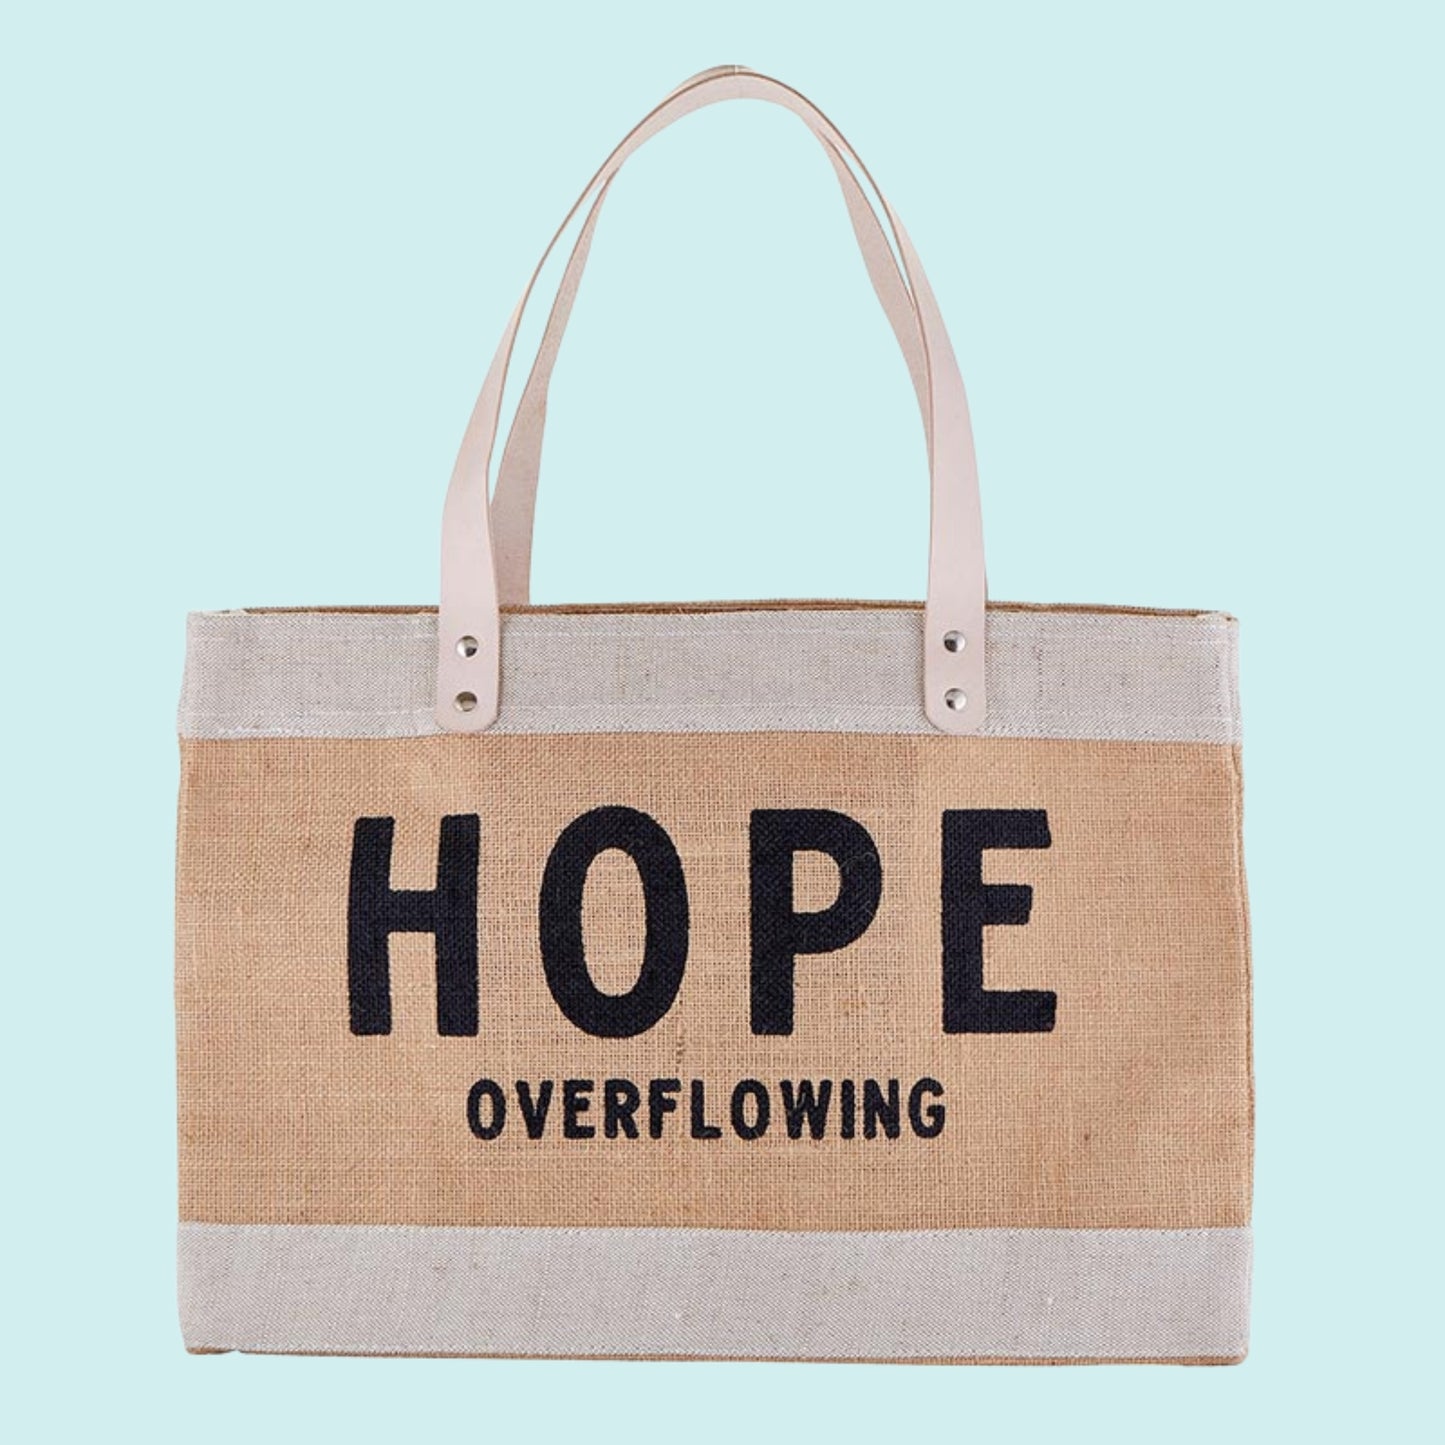 Large Jute Market Tote Bag - HOPE OVERFLOWING - great for the beach, park, pool, Farmer's Market, or Craft Fairs | Versatile Tote with Inside Pocket | oak7west.com